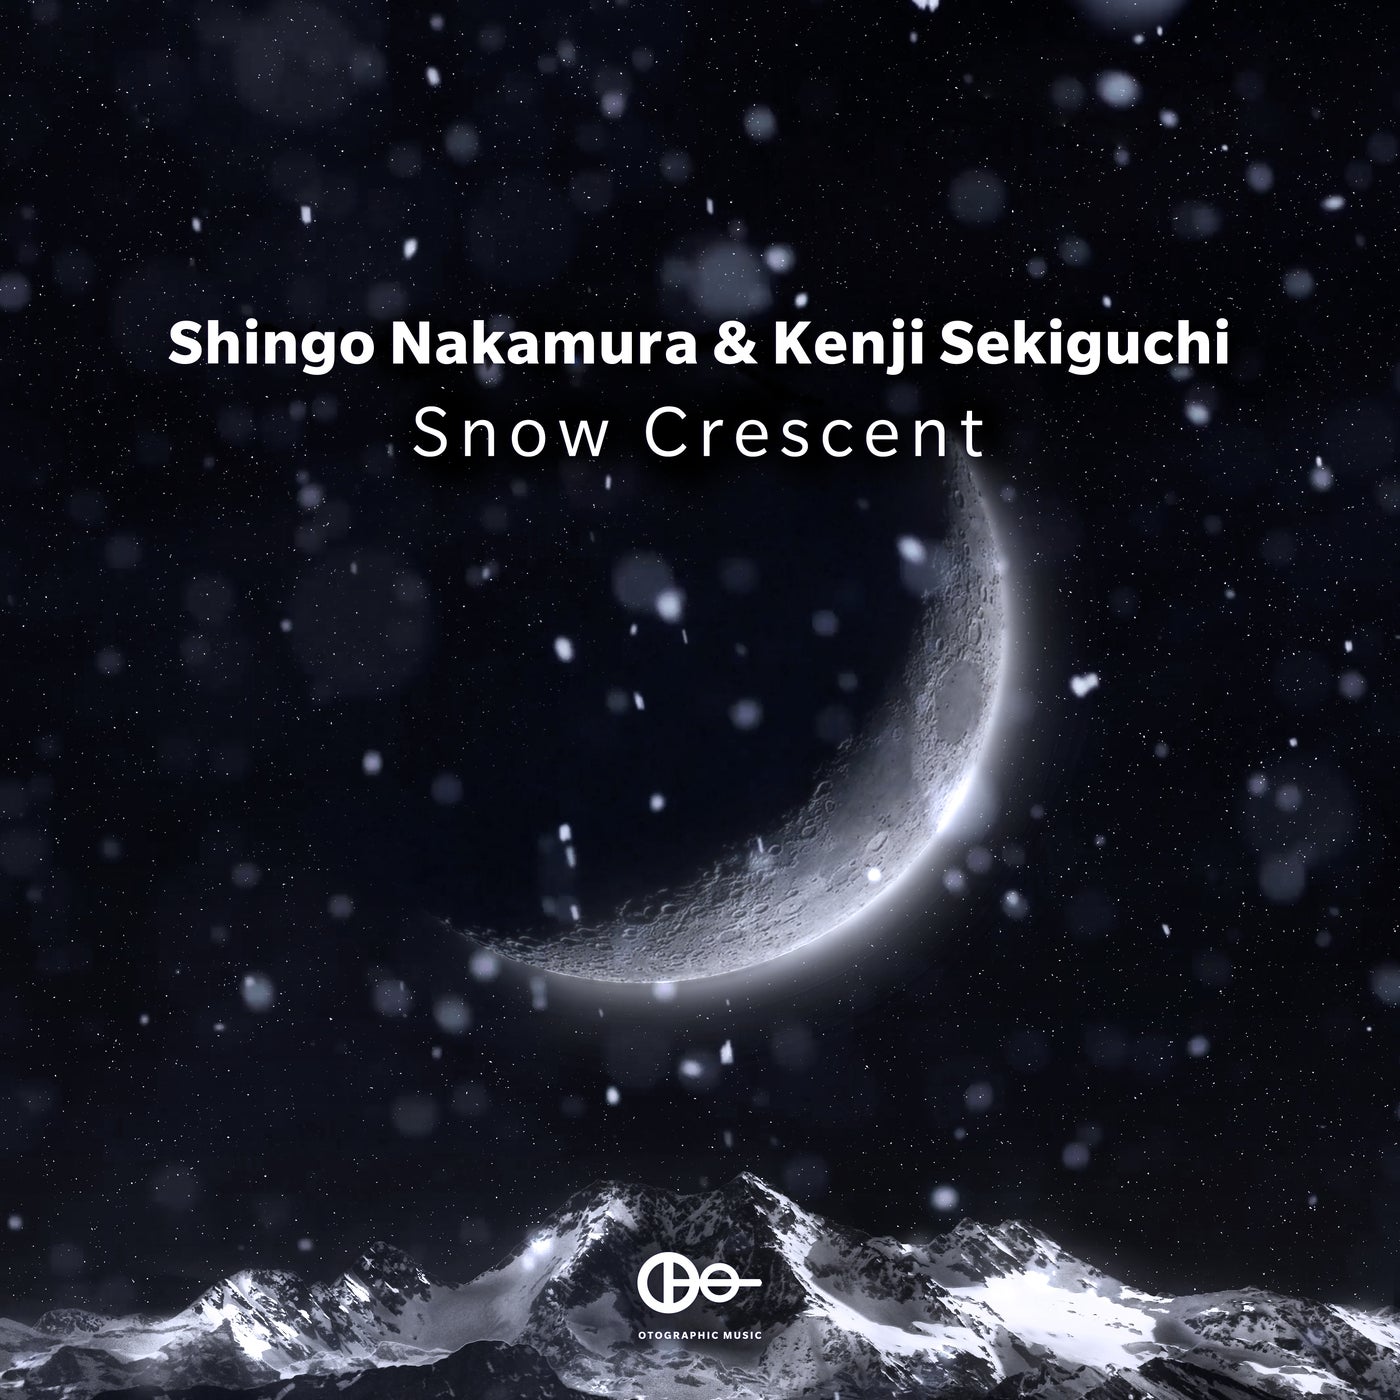 Stream Kenji Sekiguchi music  Listen to songs, albums, playlists for free  on SoundCloud